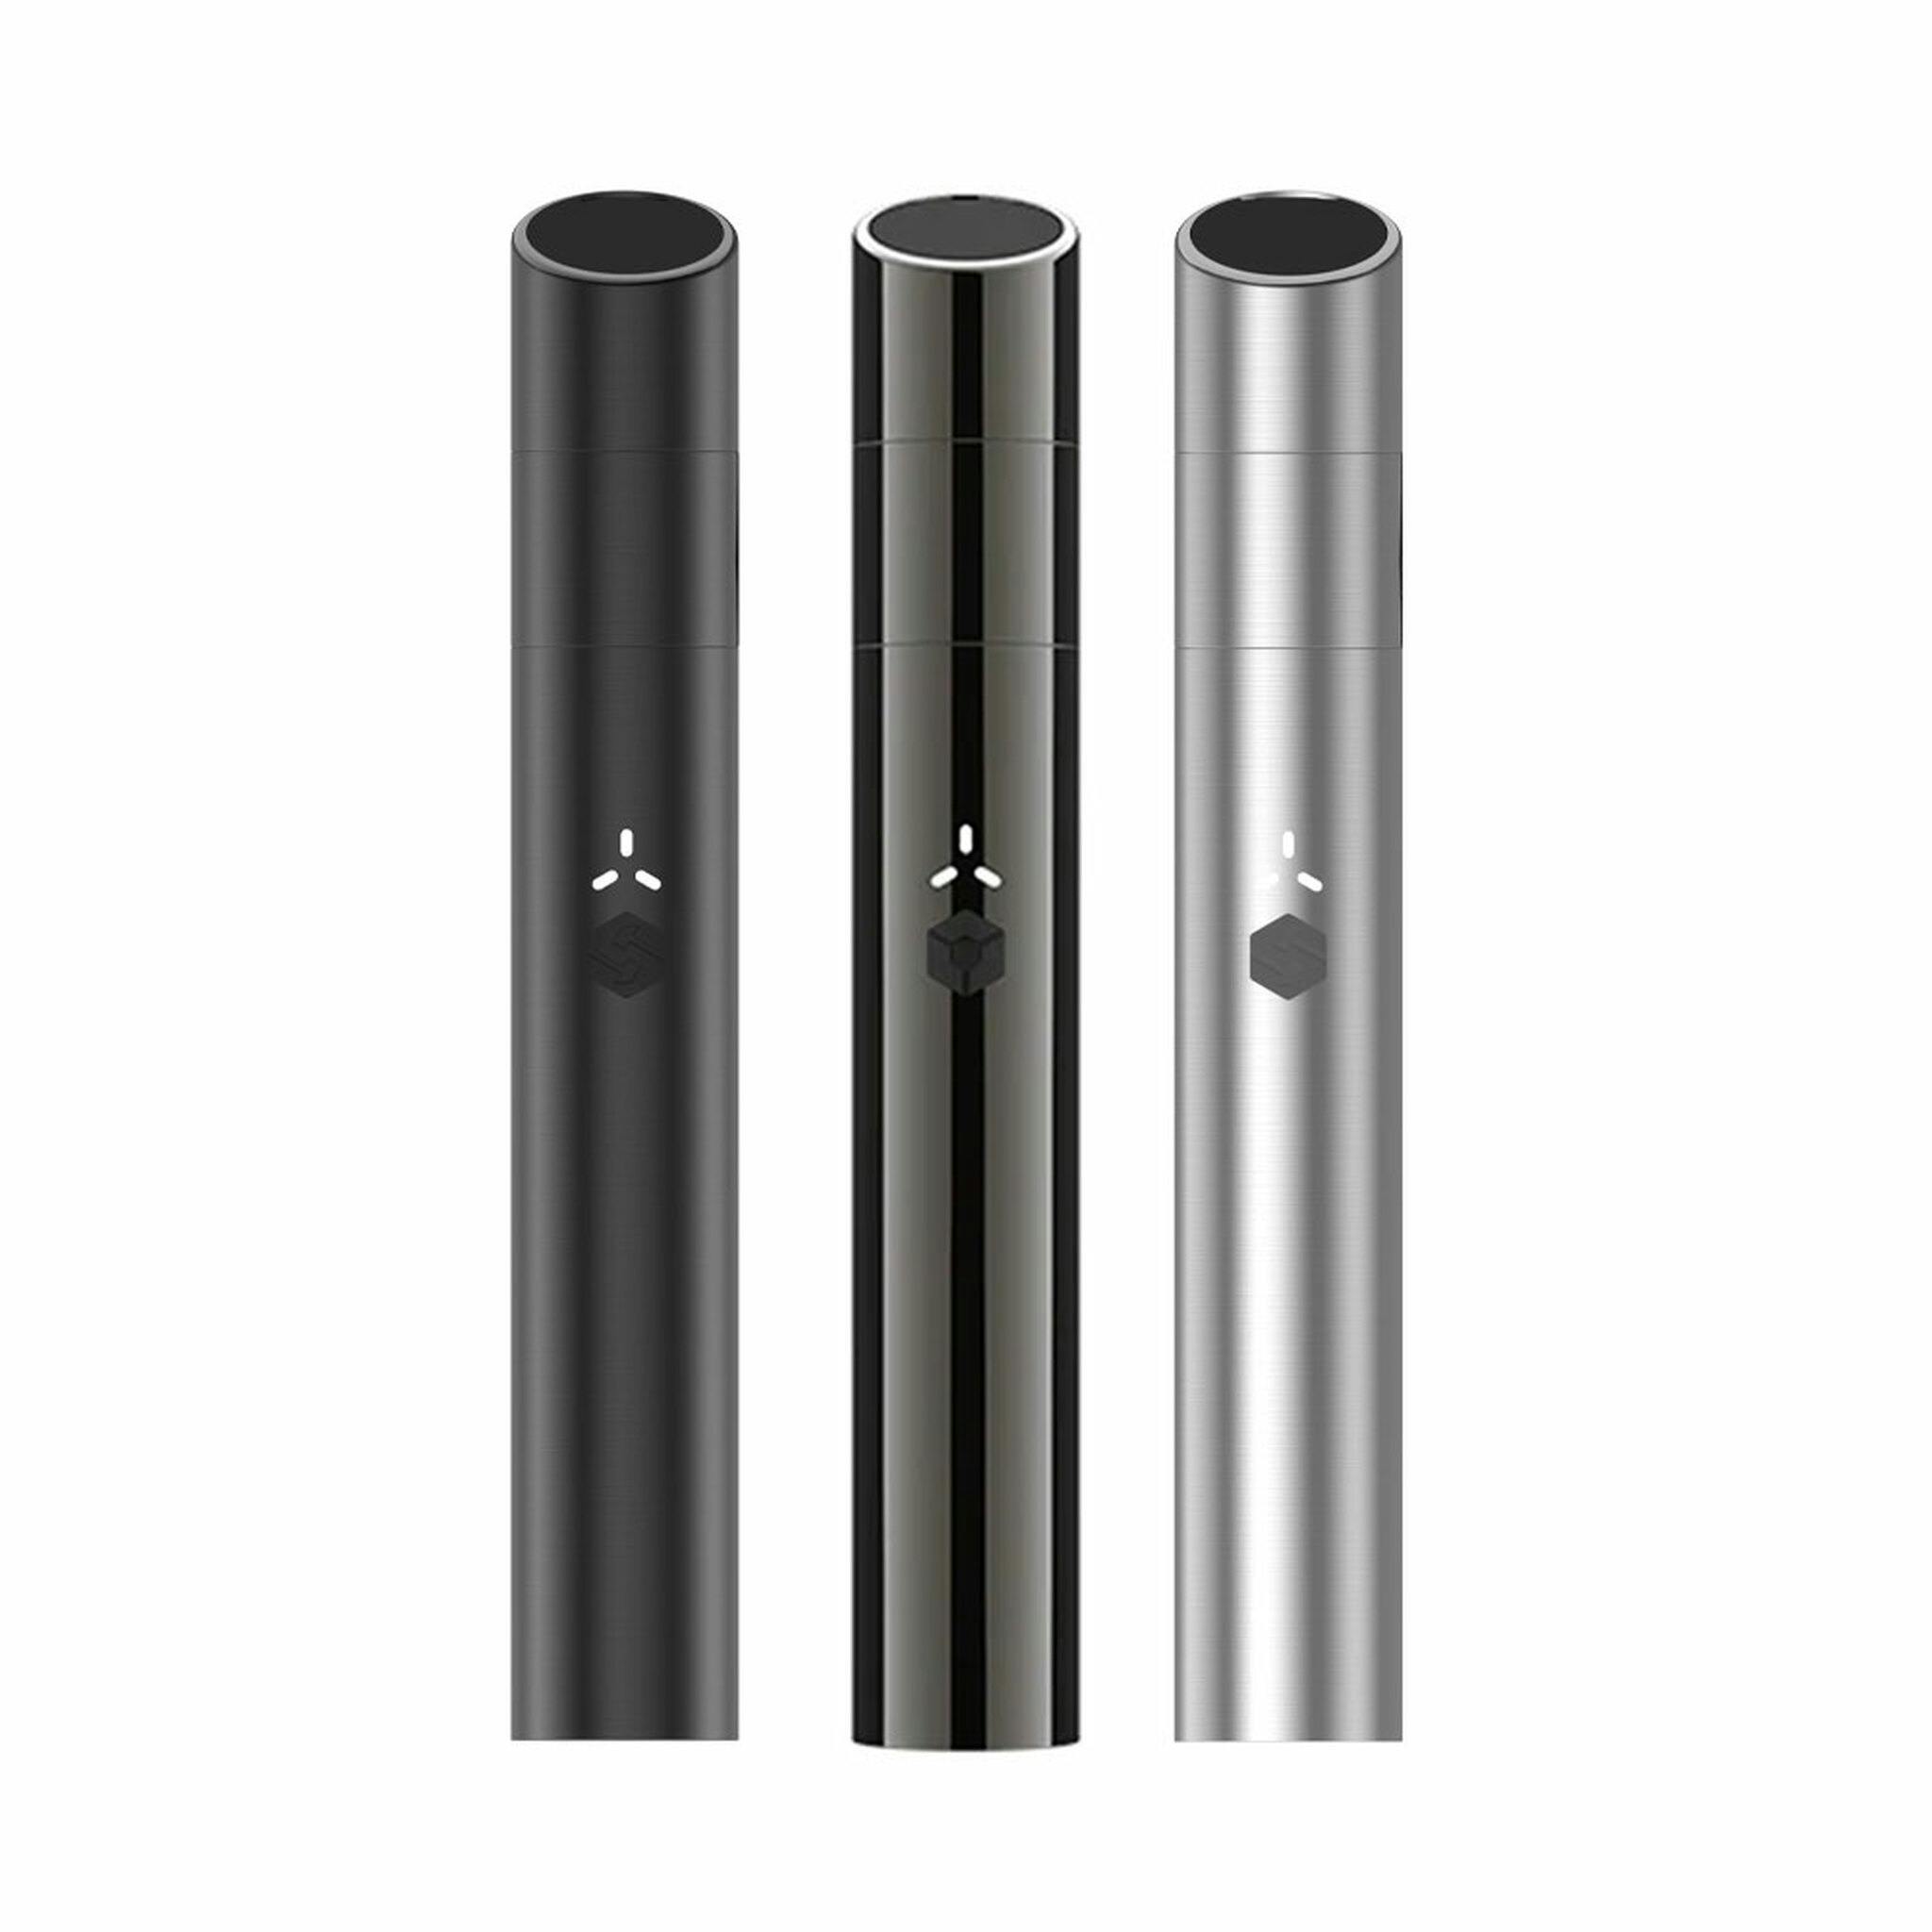 Stonesmiths' Slash Concentrate Vaporizer - Stainless Steel